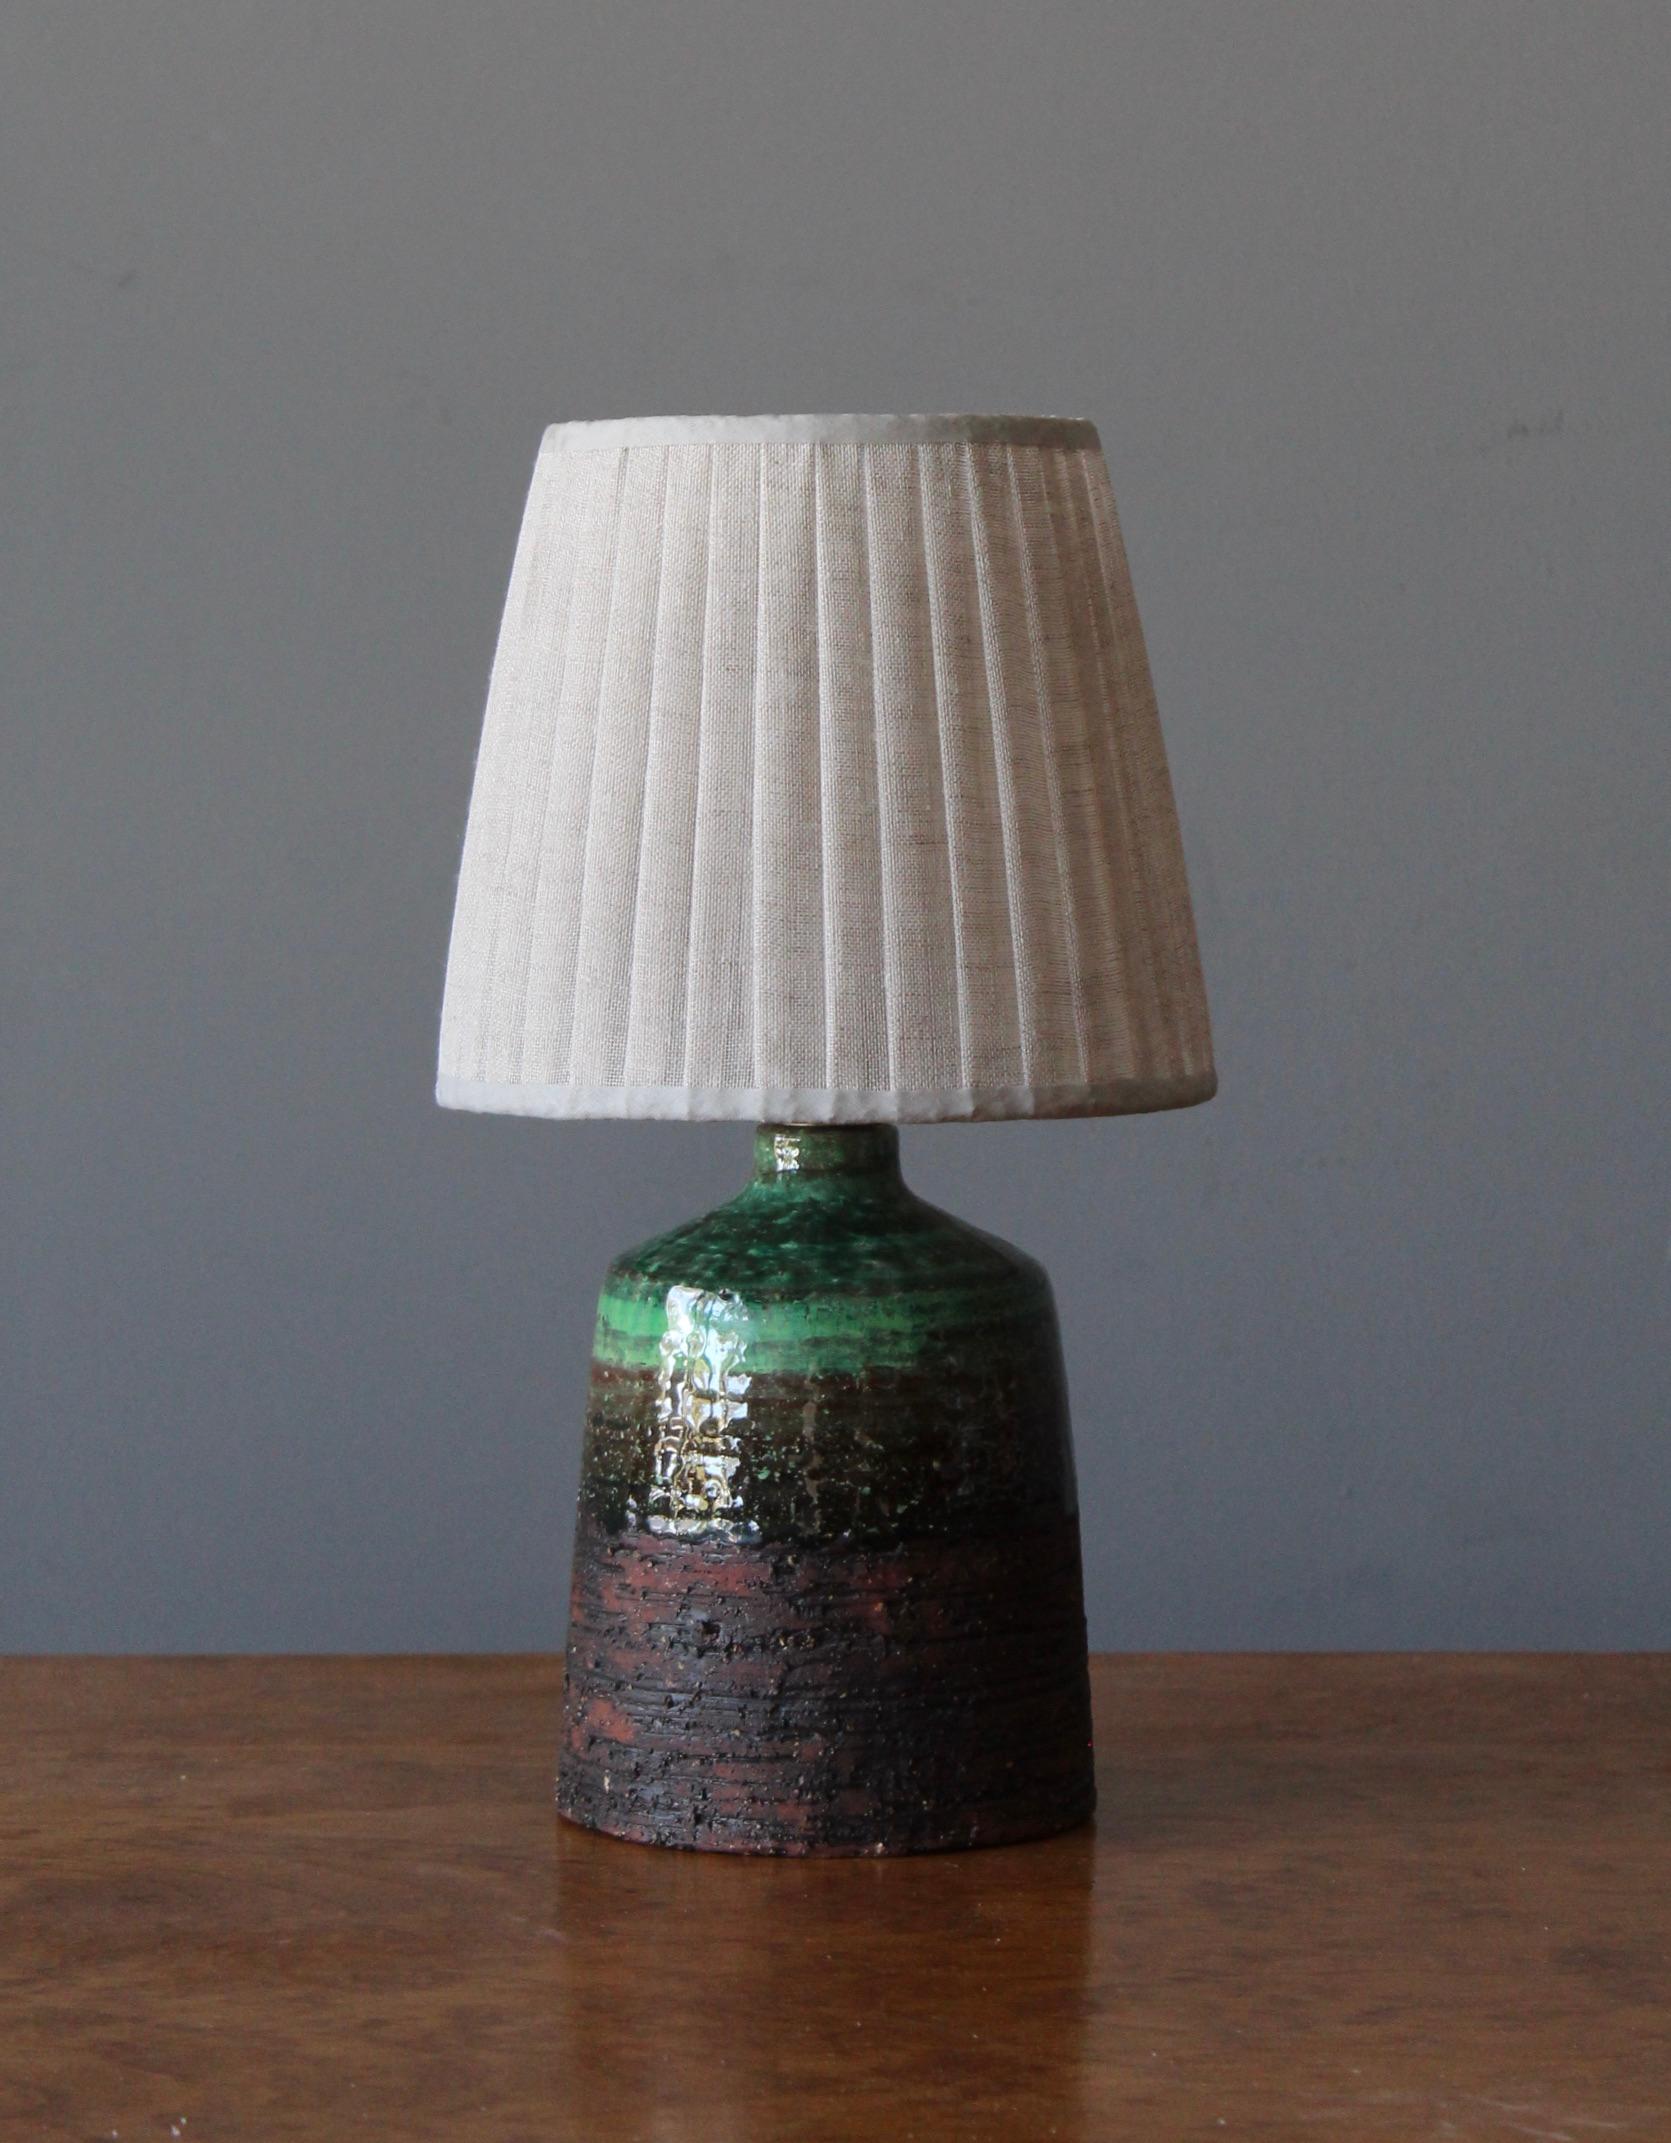 A table lamp. In glazed stoneware. Unmarked.

Stated dimensions exclude lampshade. Height includes socket. Sold without lampshade. Upon request illustrated lampshade can be included in purchase.